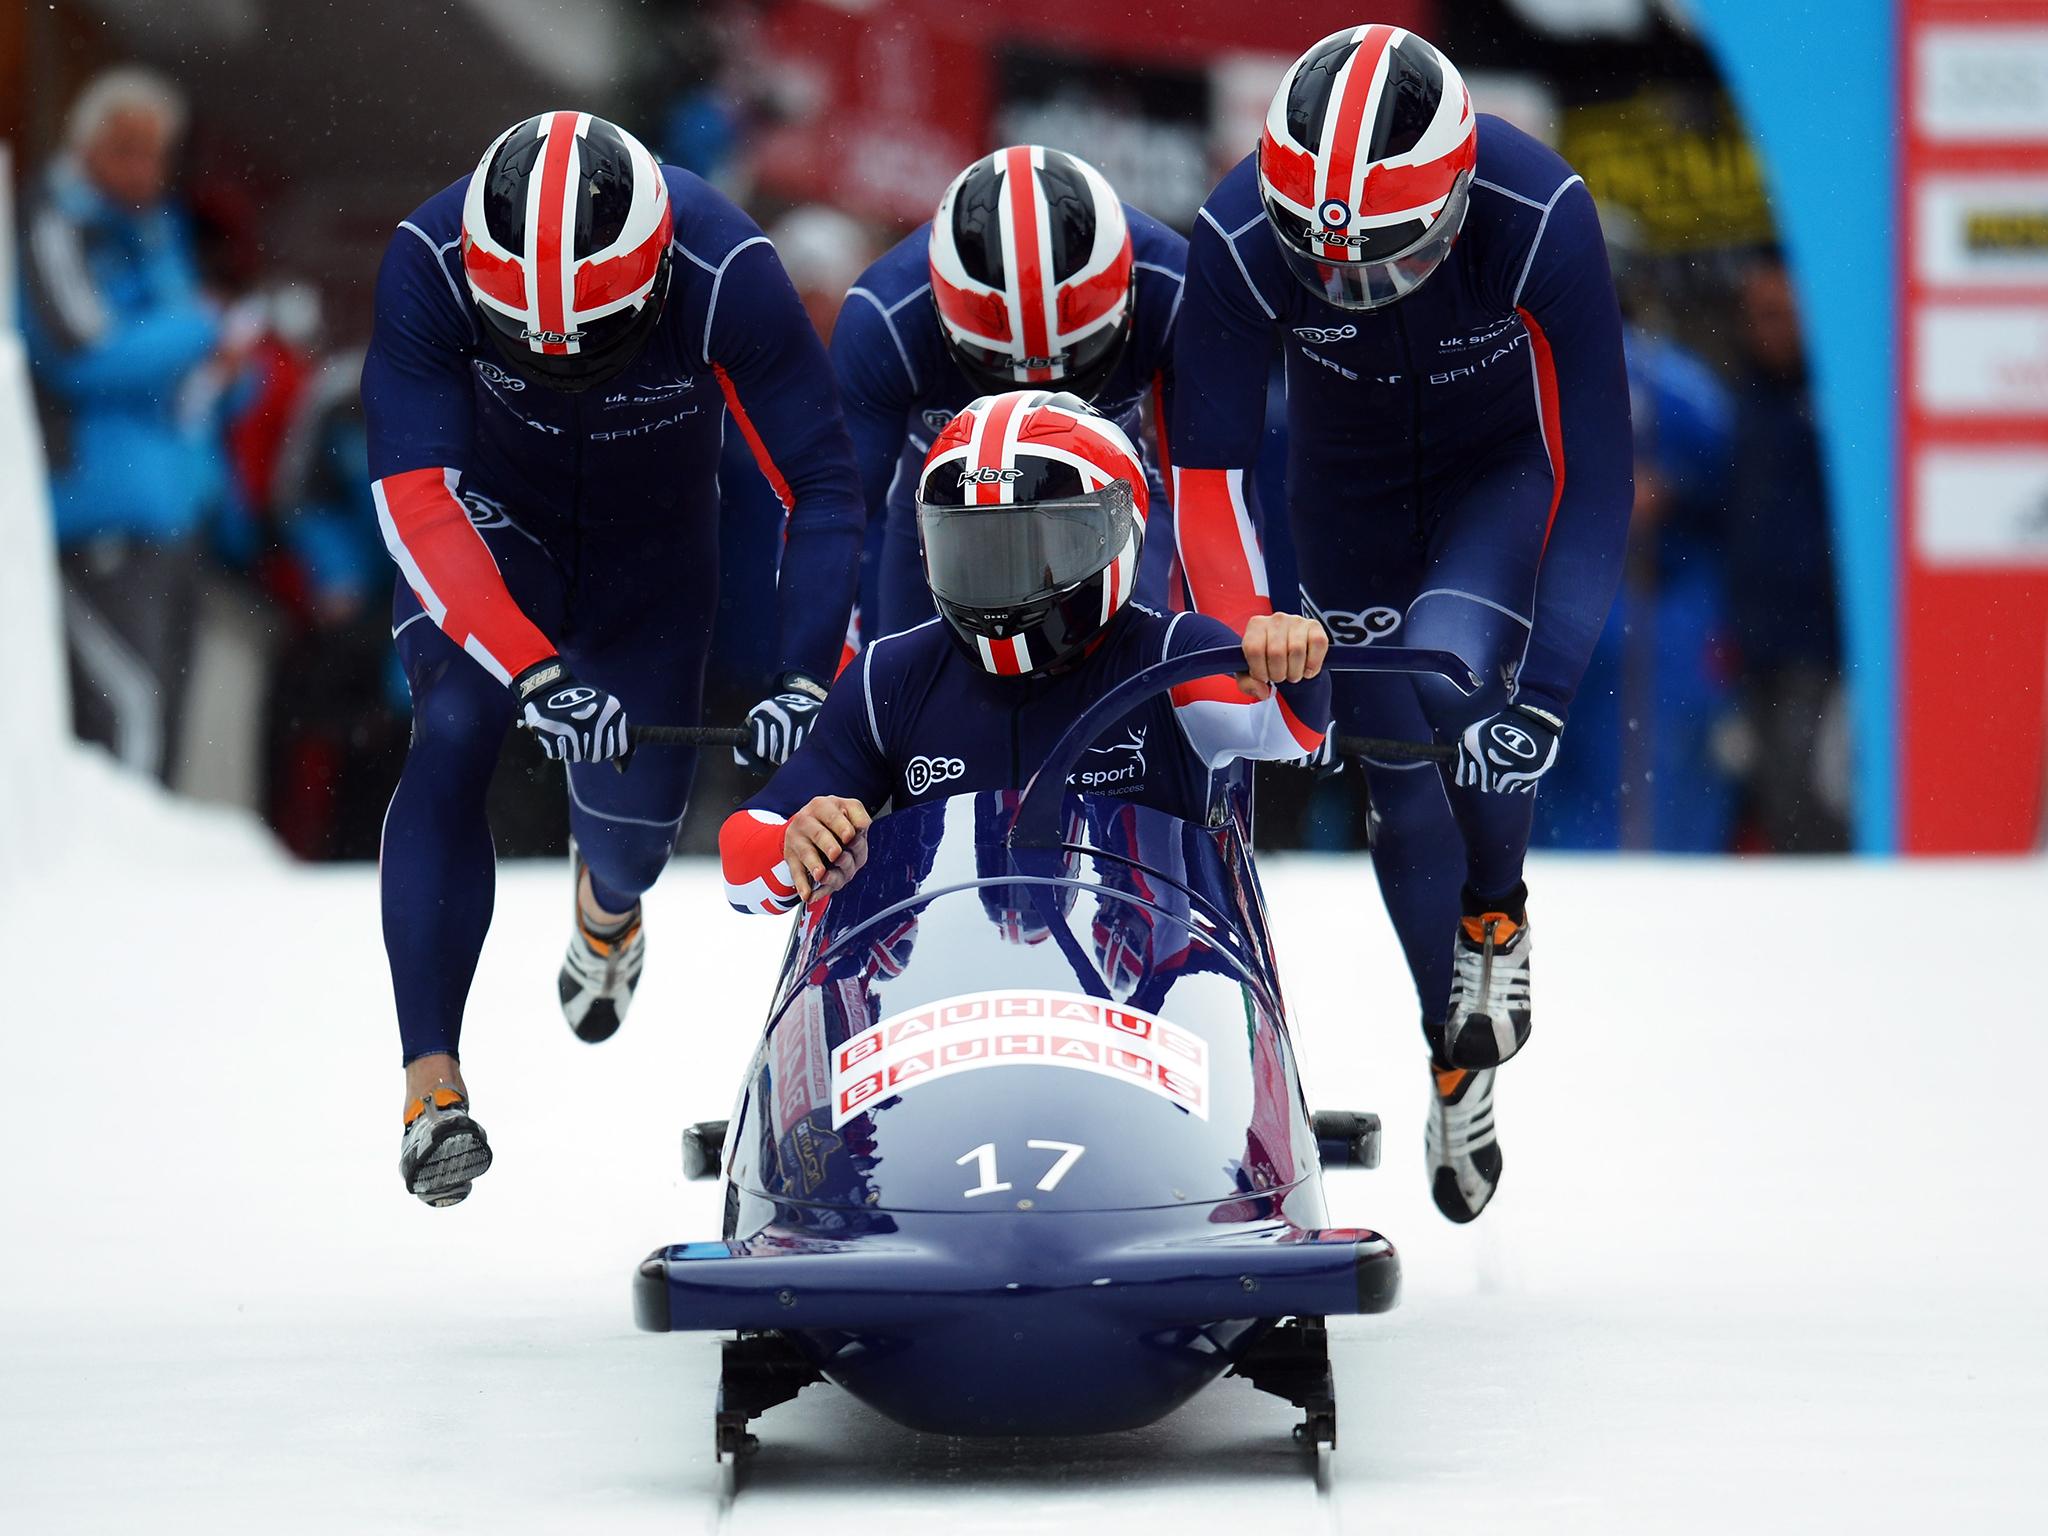 Team GB's bobsleigh team have won a retrospective bronze medal from Sochi 2014